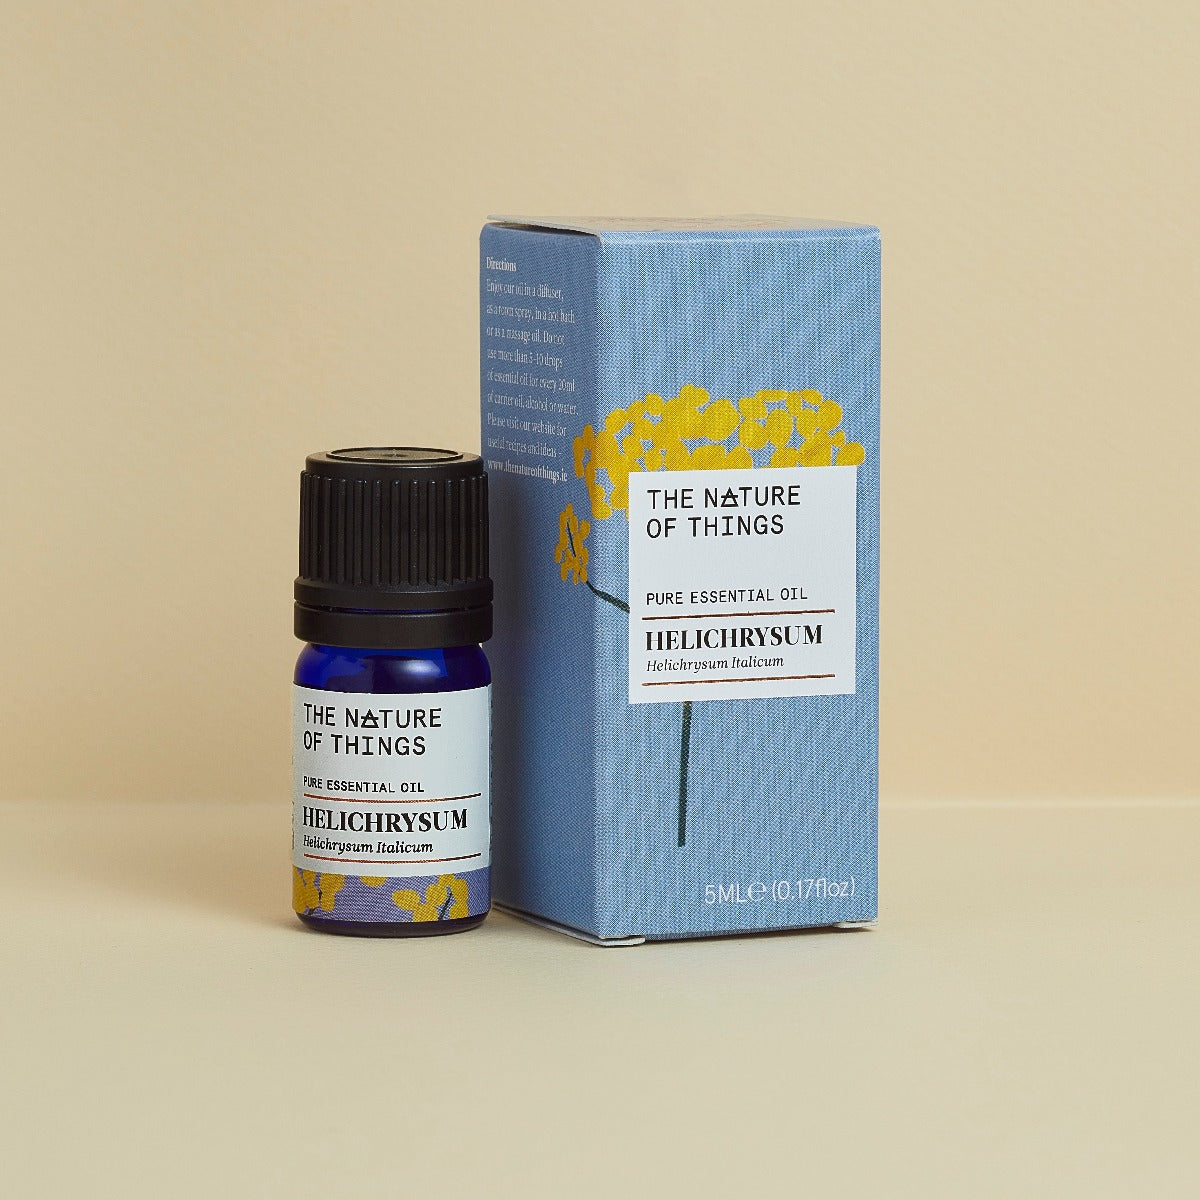 Organic Helichrysum Essential Oil from The Nature of Things